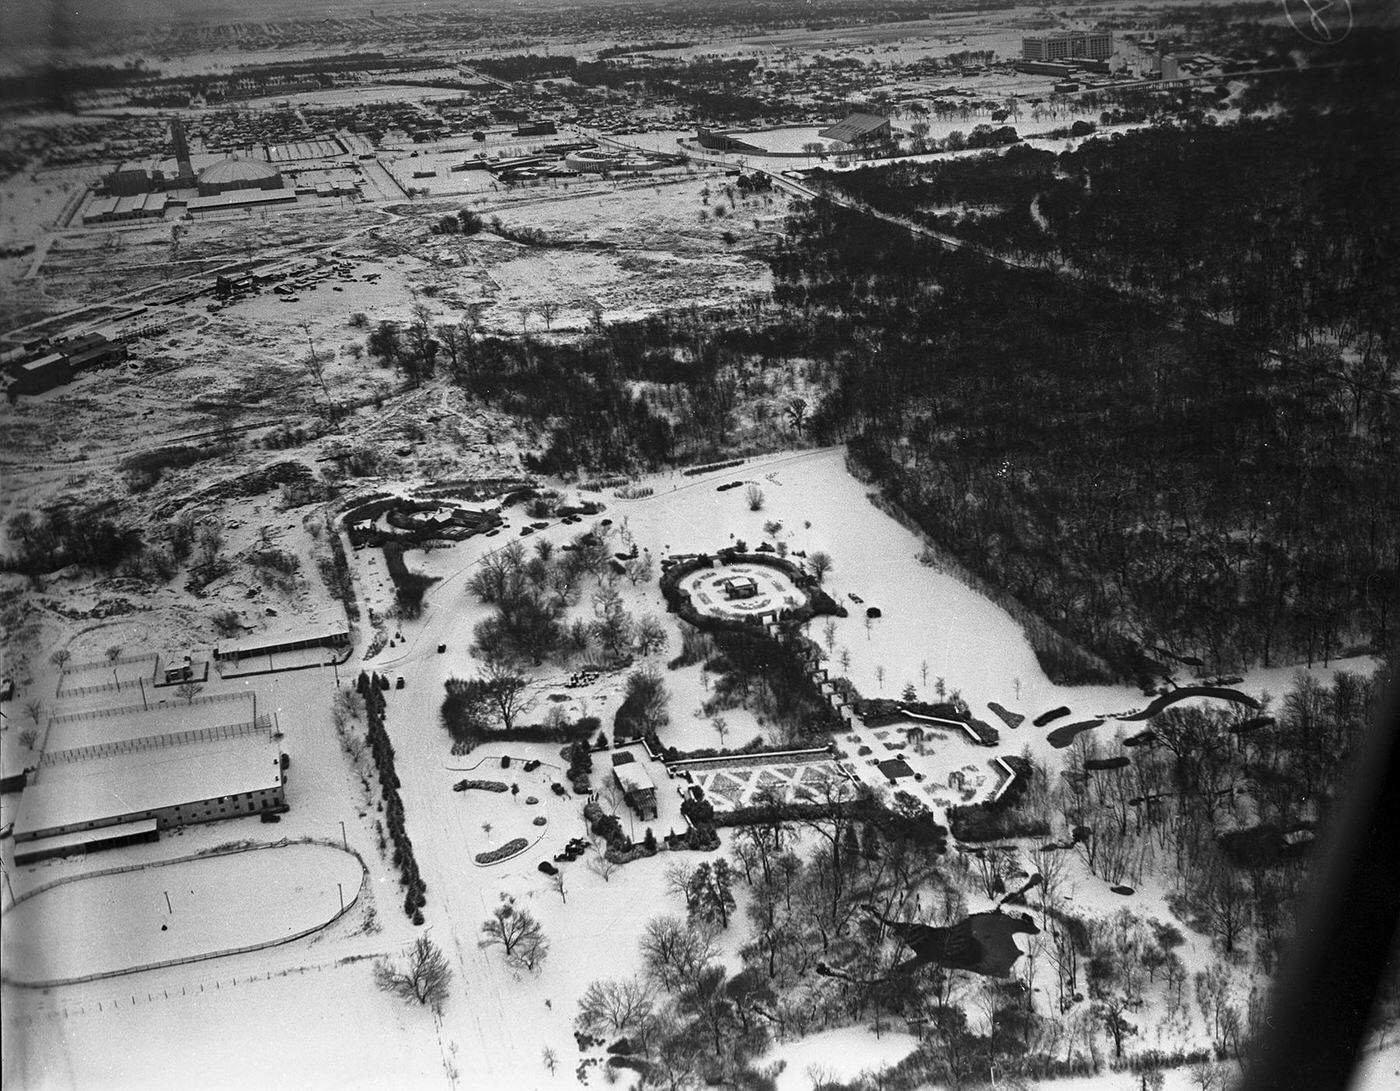 Air view of the Rose Garden, Fort Worth, Texas and Botanic Garden, Fort Worth, Texas, covered in snow, 1940